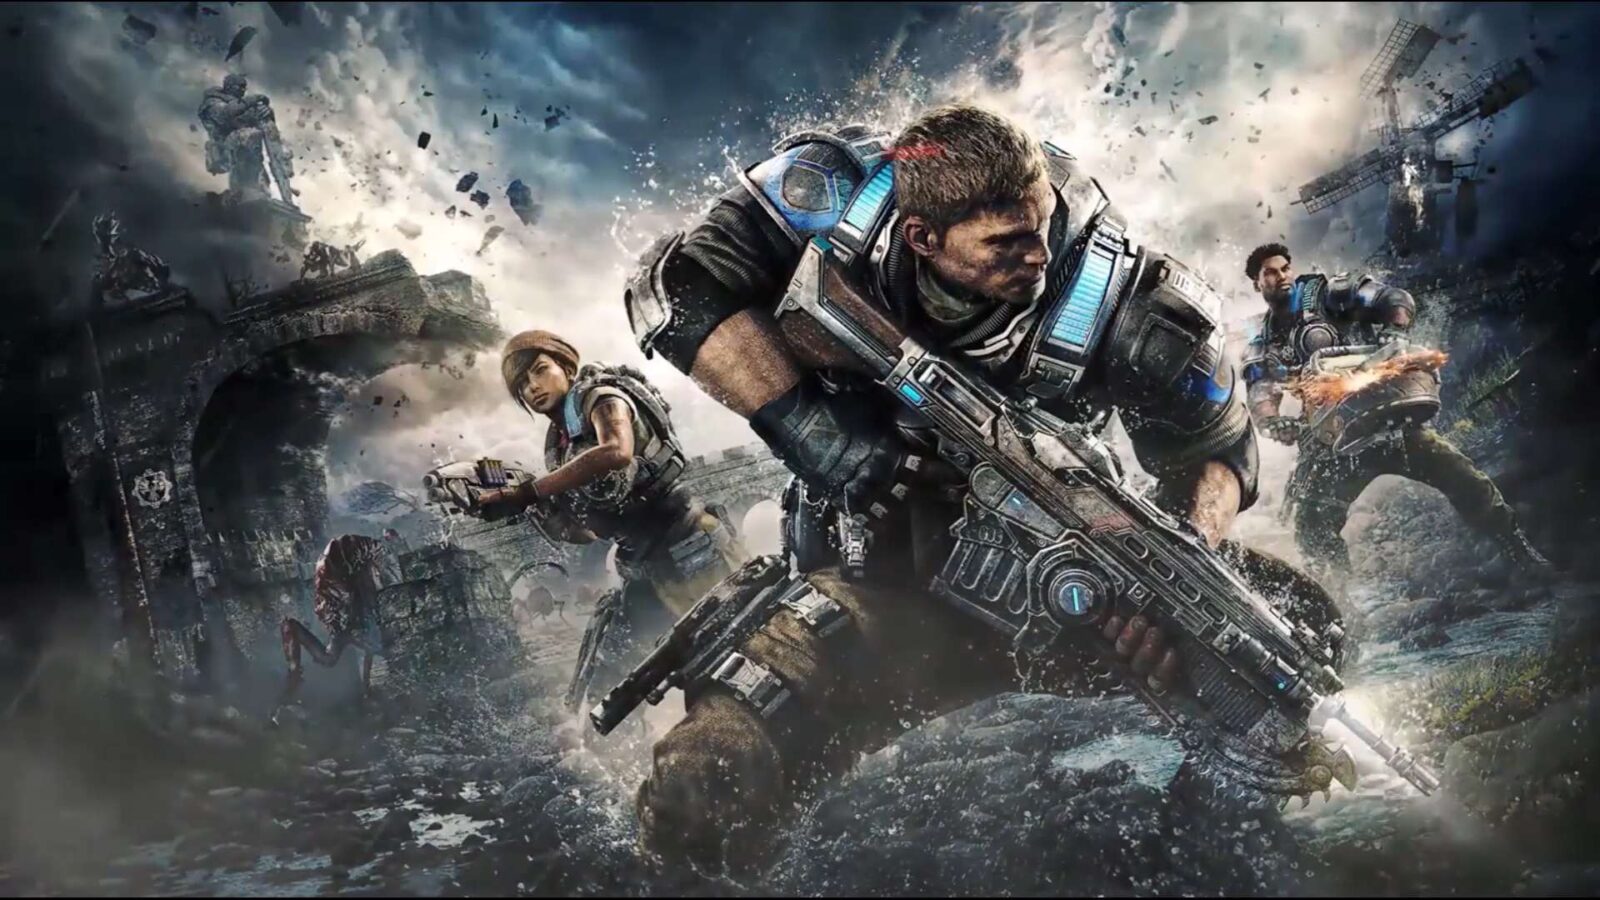 LiveWallpapers4Free.com | Gears of War 4 HD Wallpaper With Music - Free Desktop Background